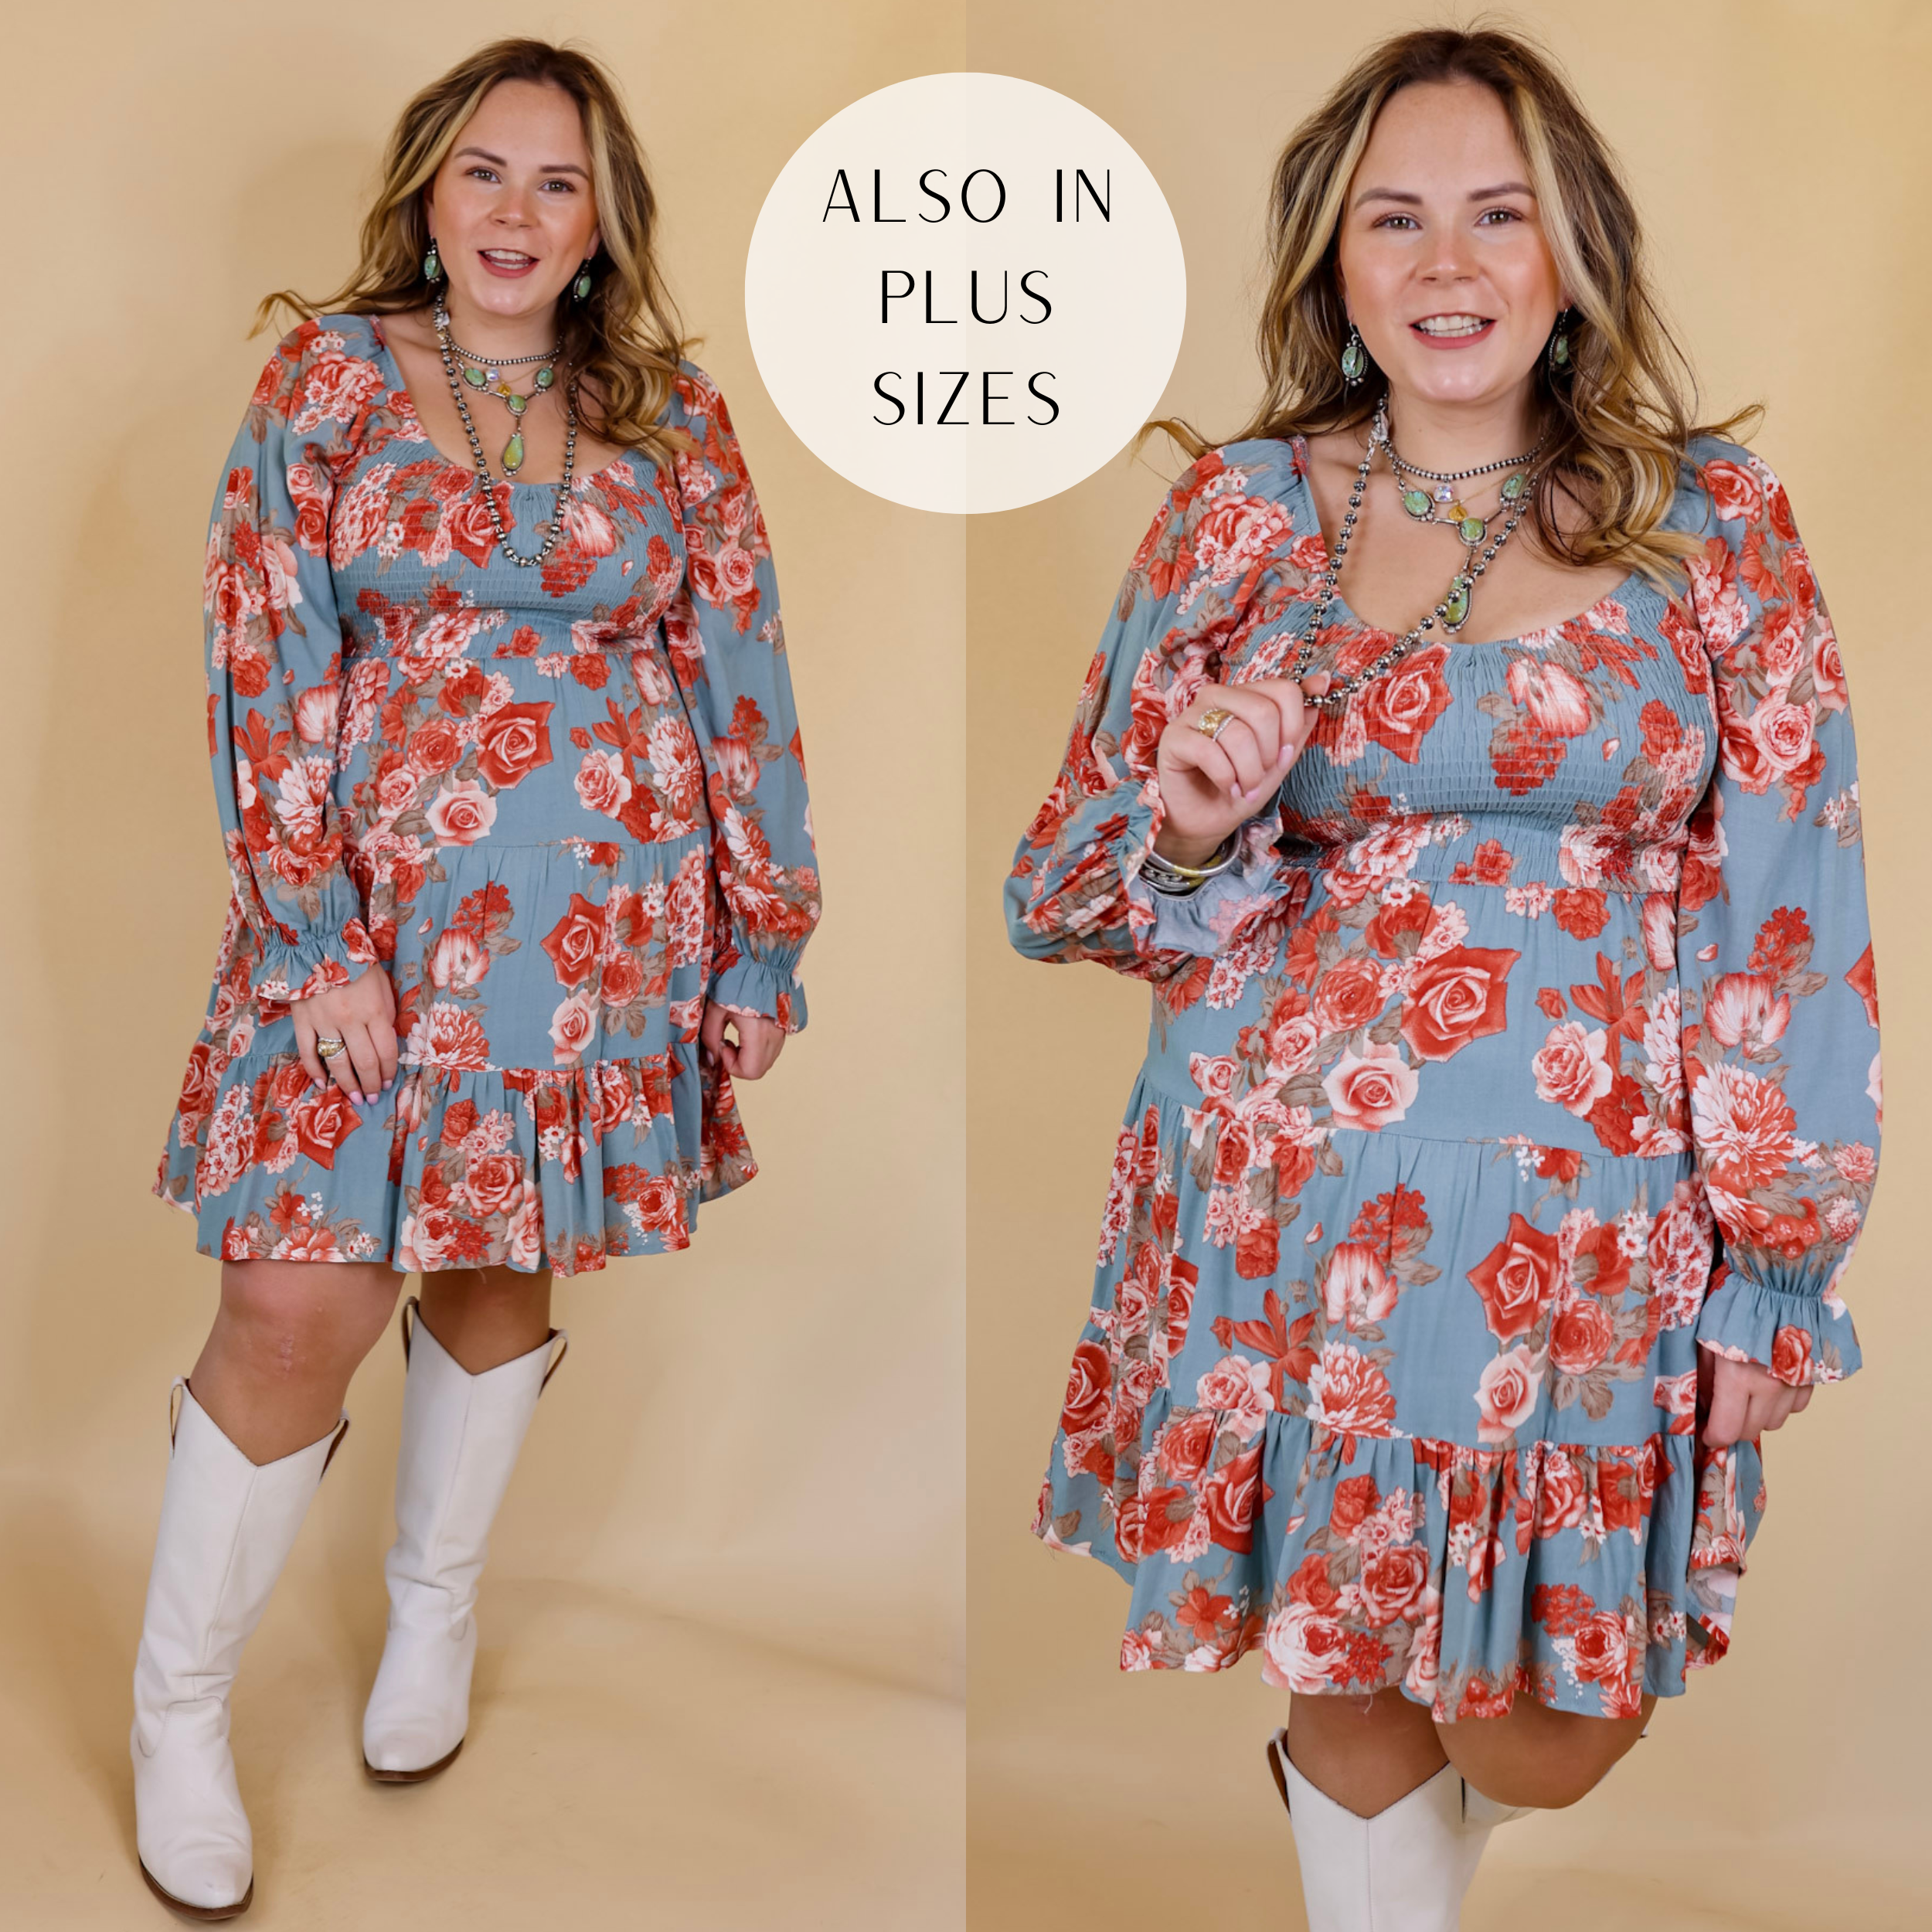 Model is wearing a long sleeve floral dress with a smocked bodice in dusty blue. Model has this dress paired with tall, white boots and Navajo jewelry. Background is solid tan.